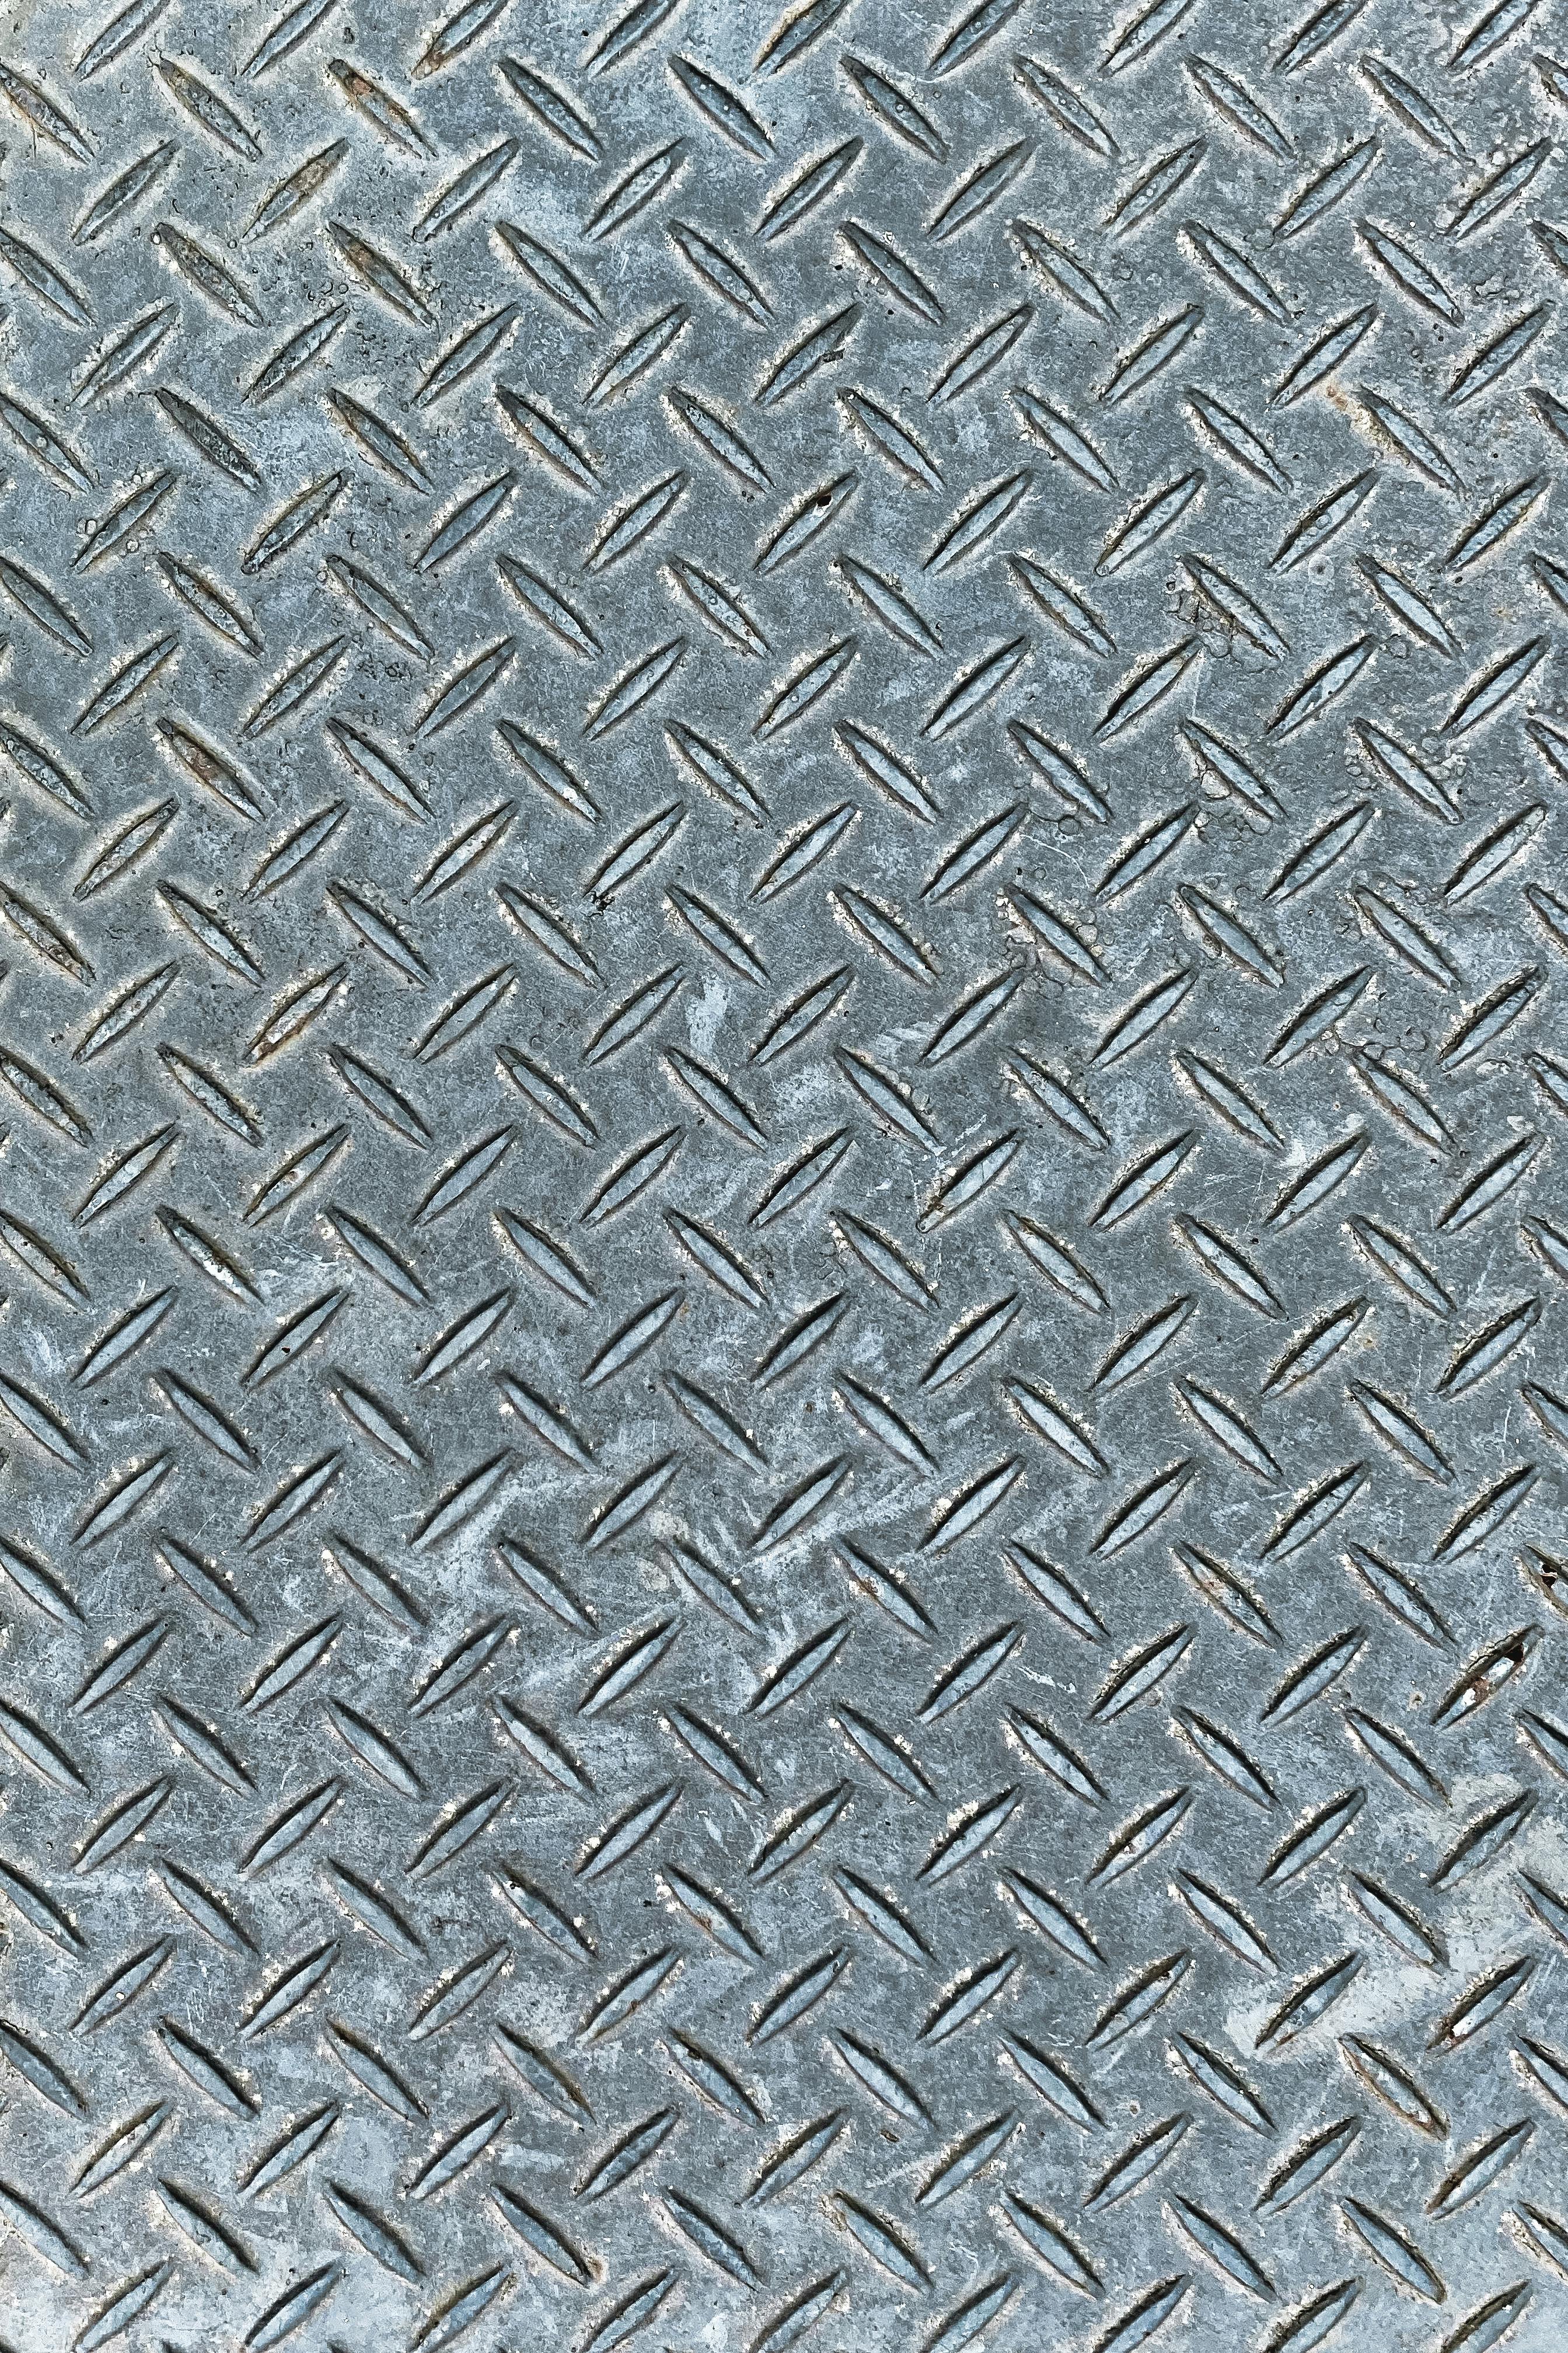 Metal Texture Images | Free Vector, PNG & PSD Background & Texture Photos -  rawpixel